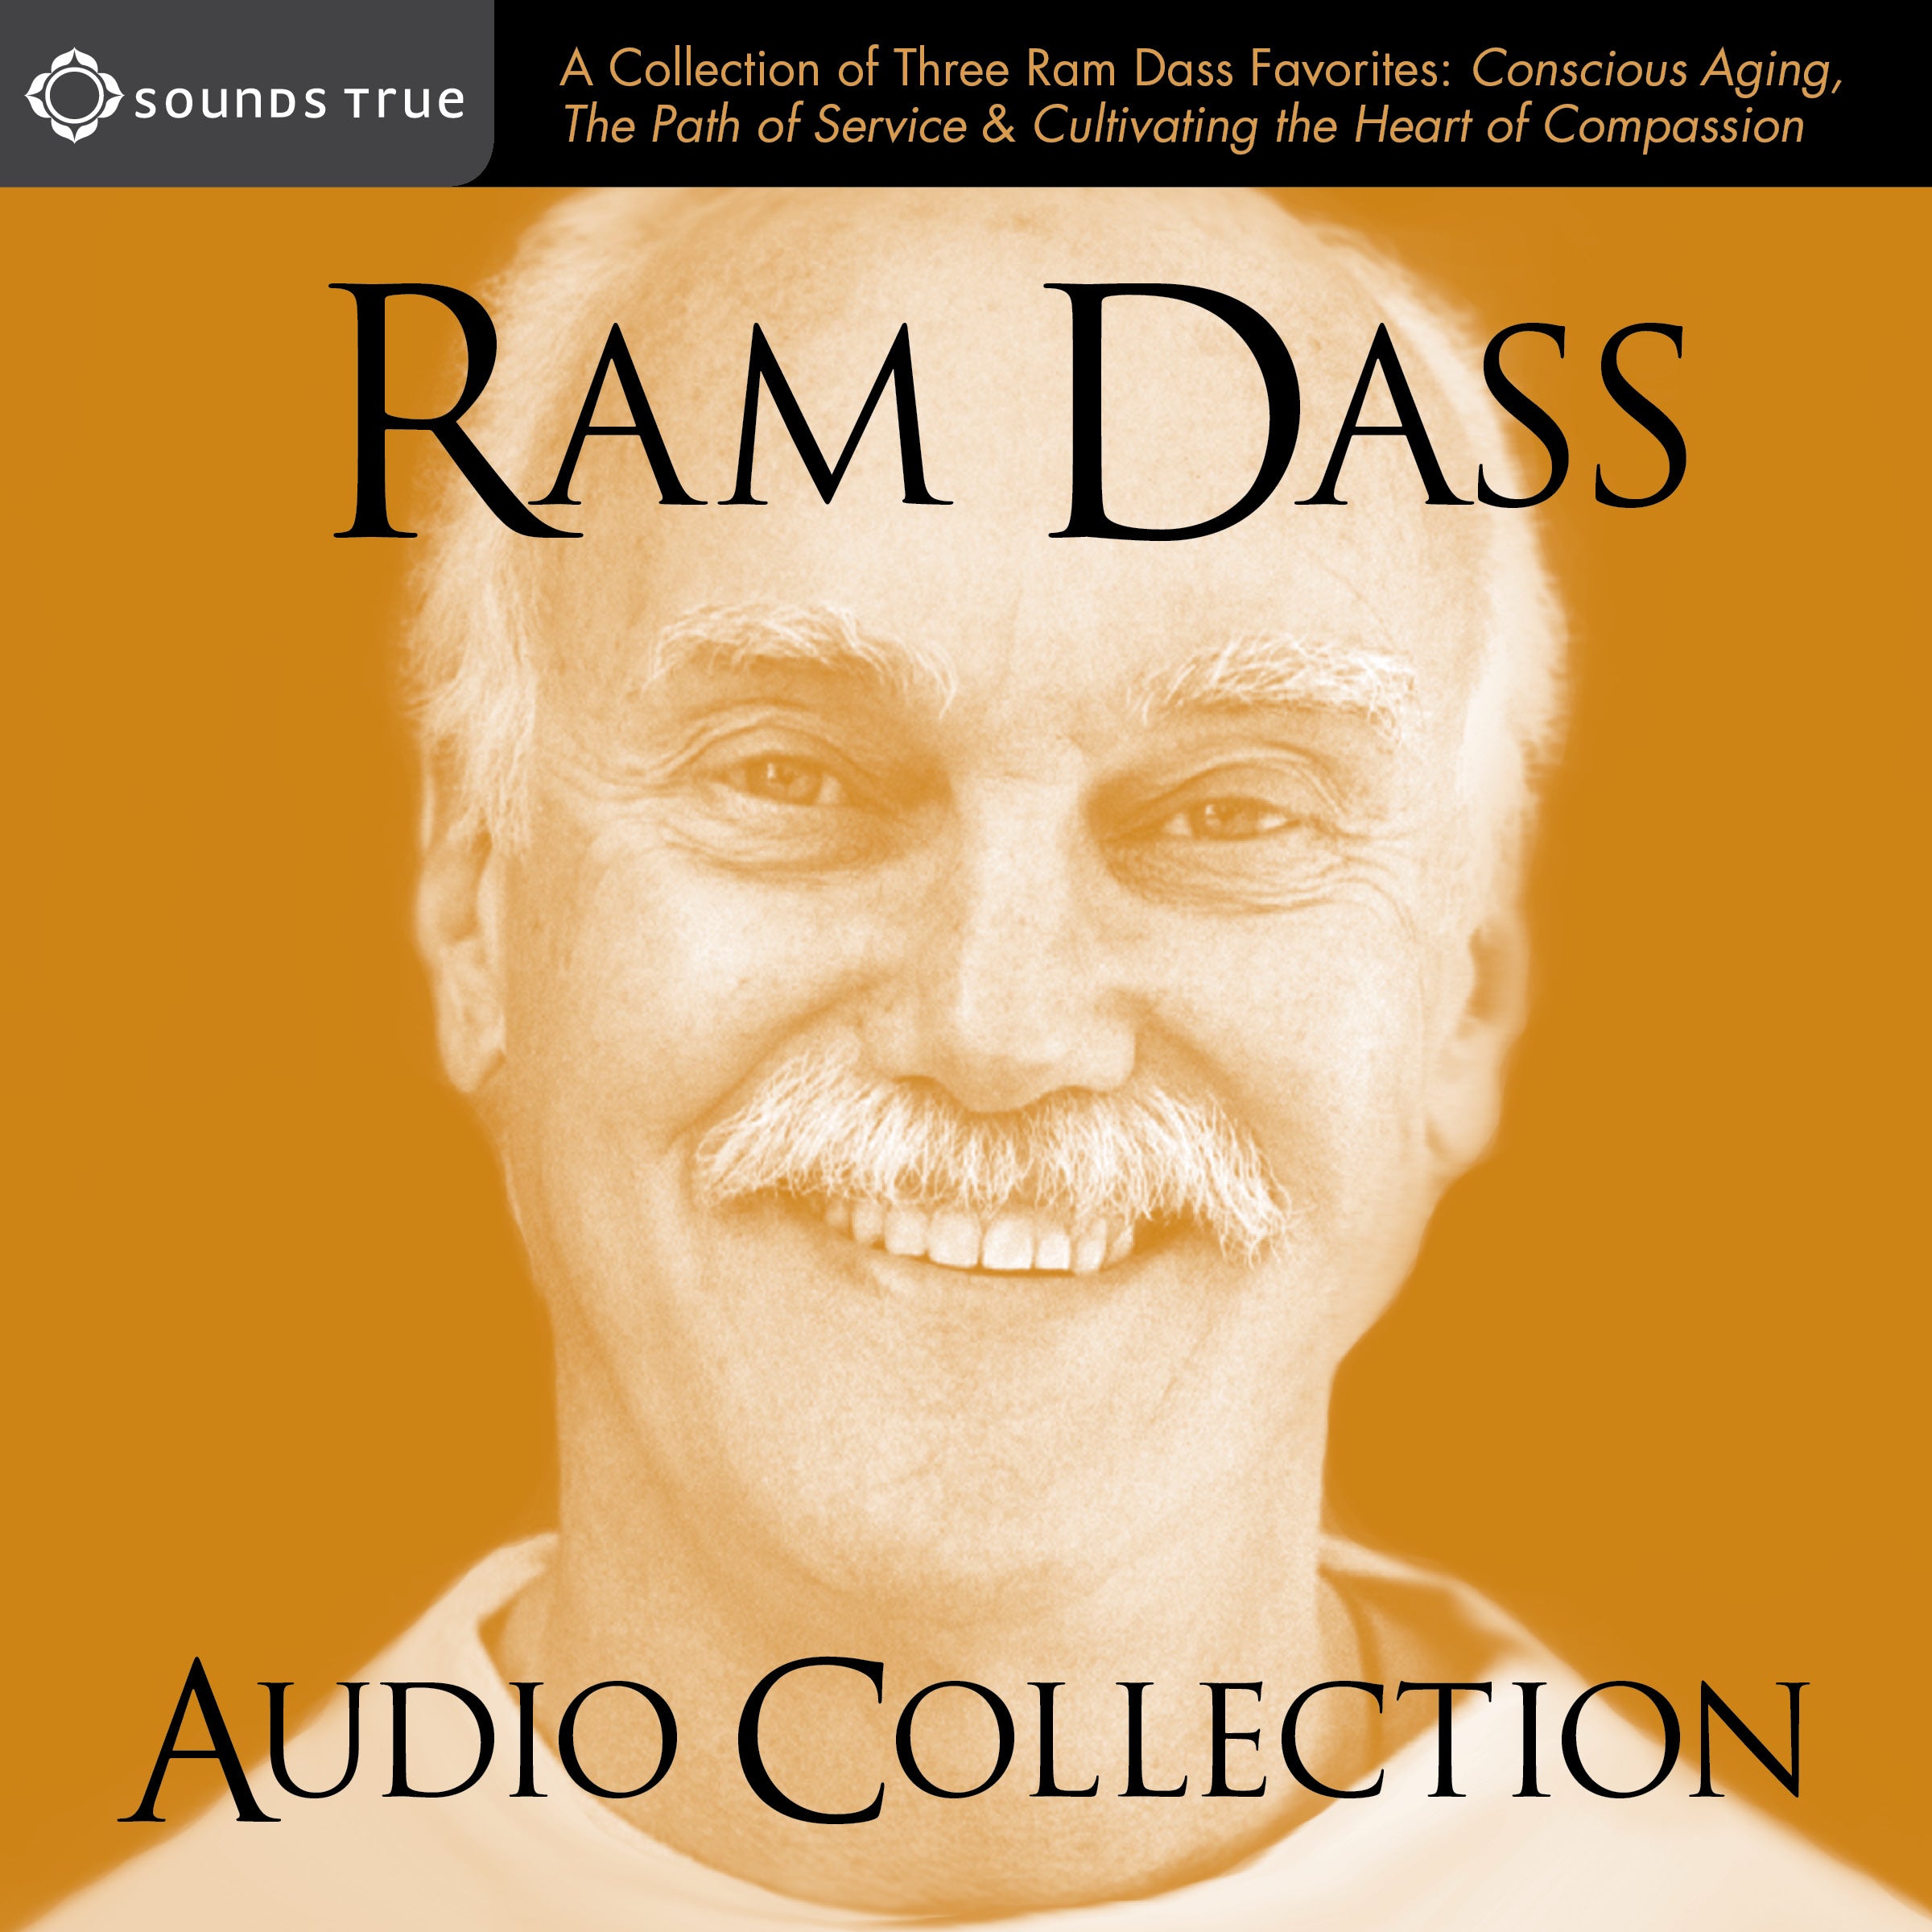 The Ram Dass Audio Collection